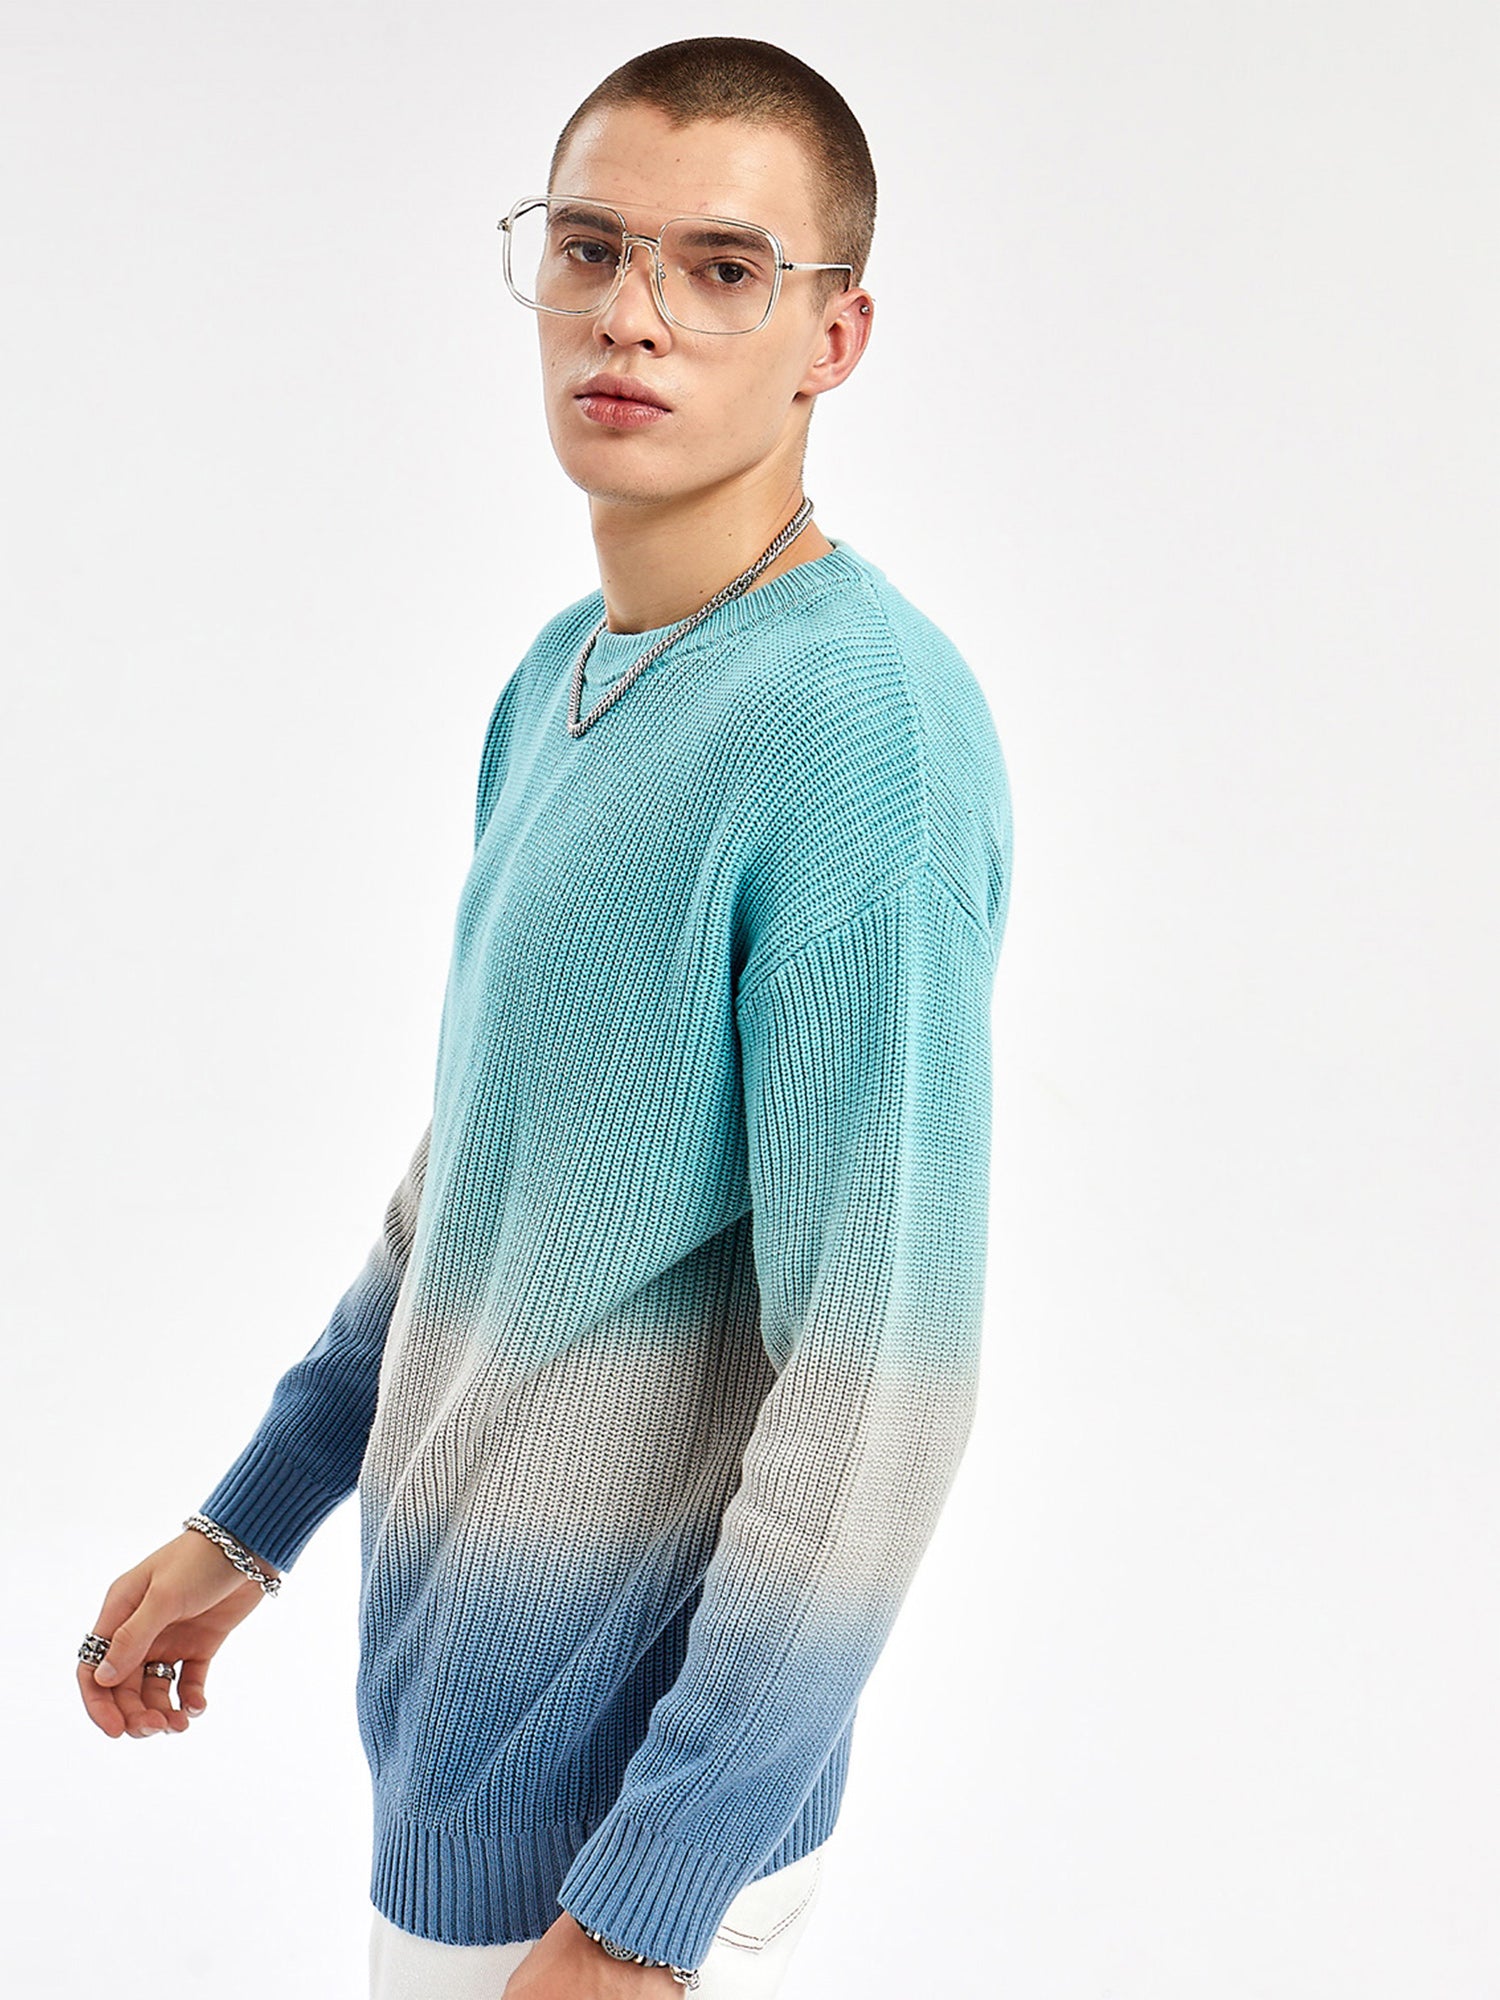 Round-Neck Tie and dye Blue Long-Sleeve Sweaters for men's